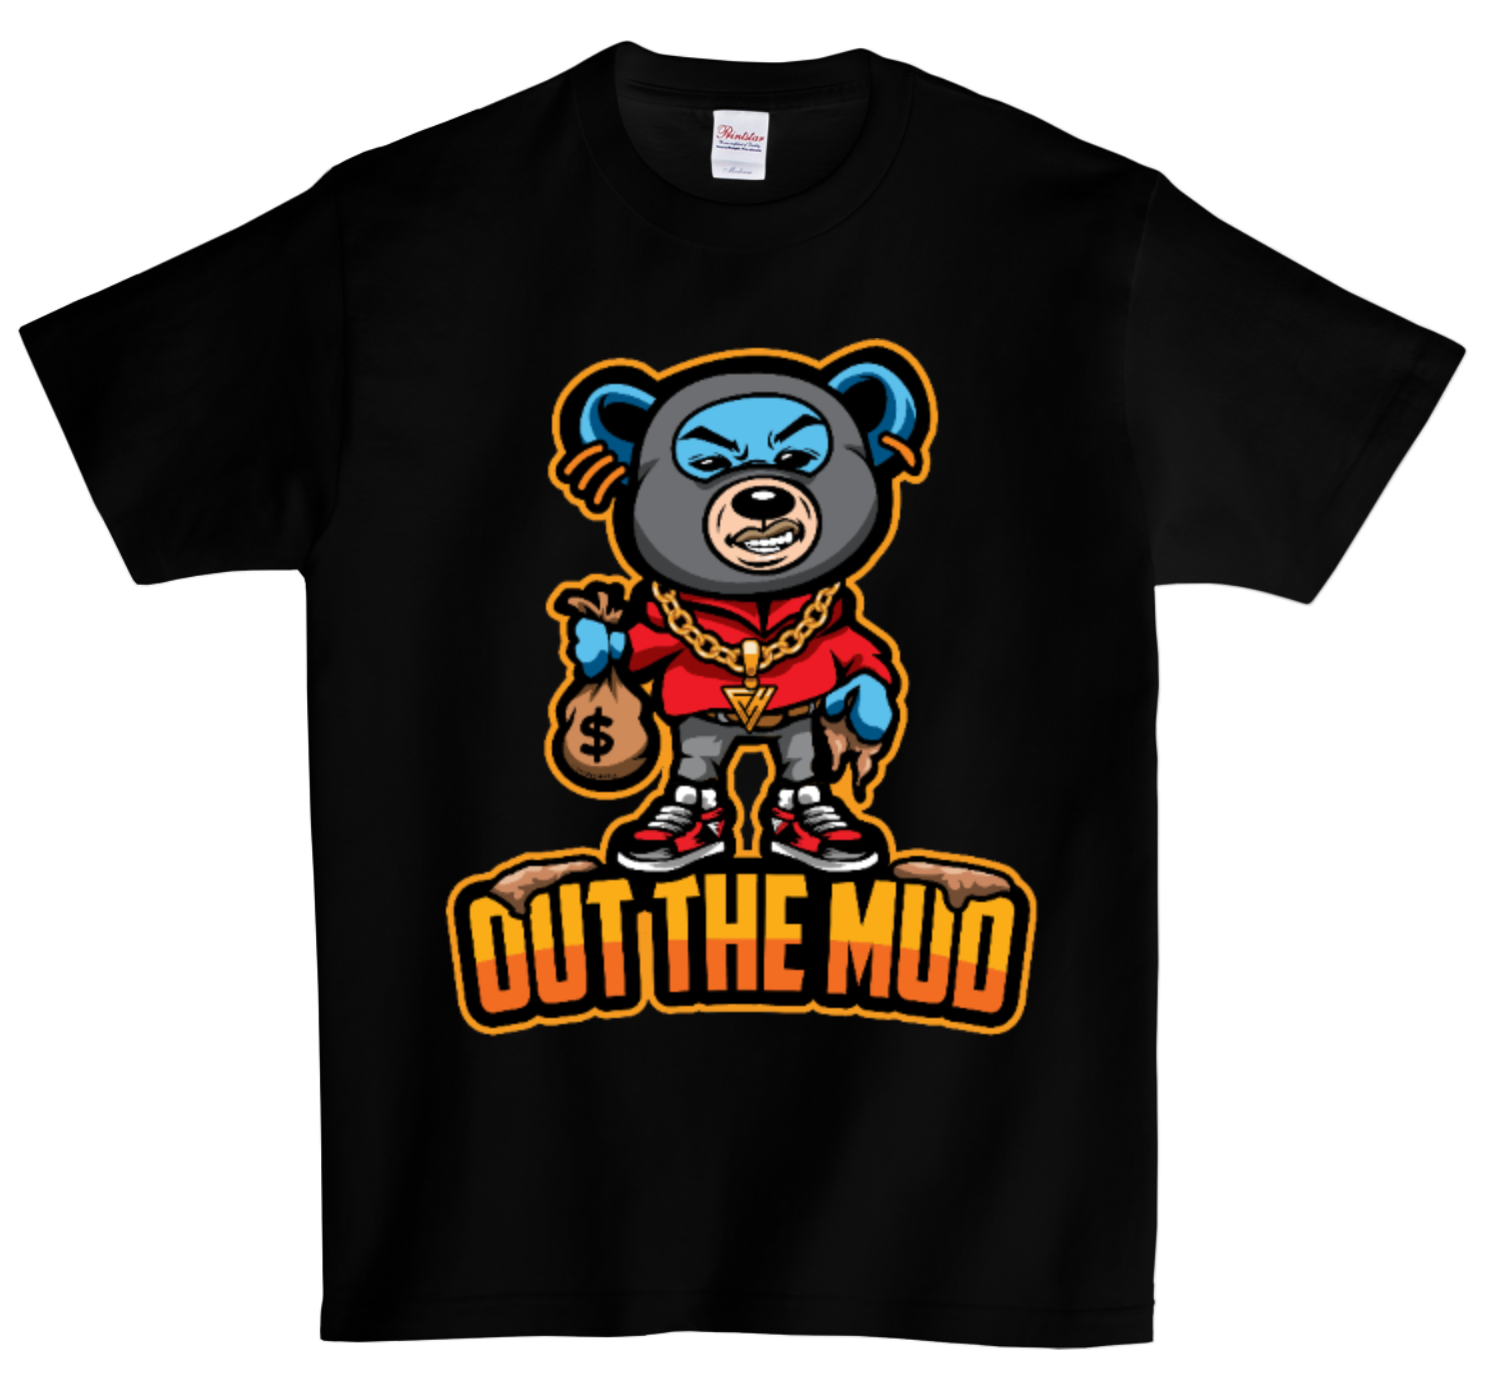 DTG T Shirt | Out the Mud Full color Edition